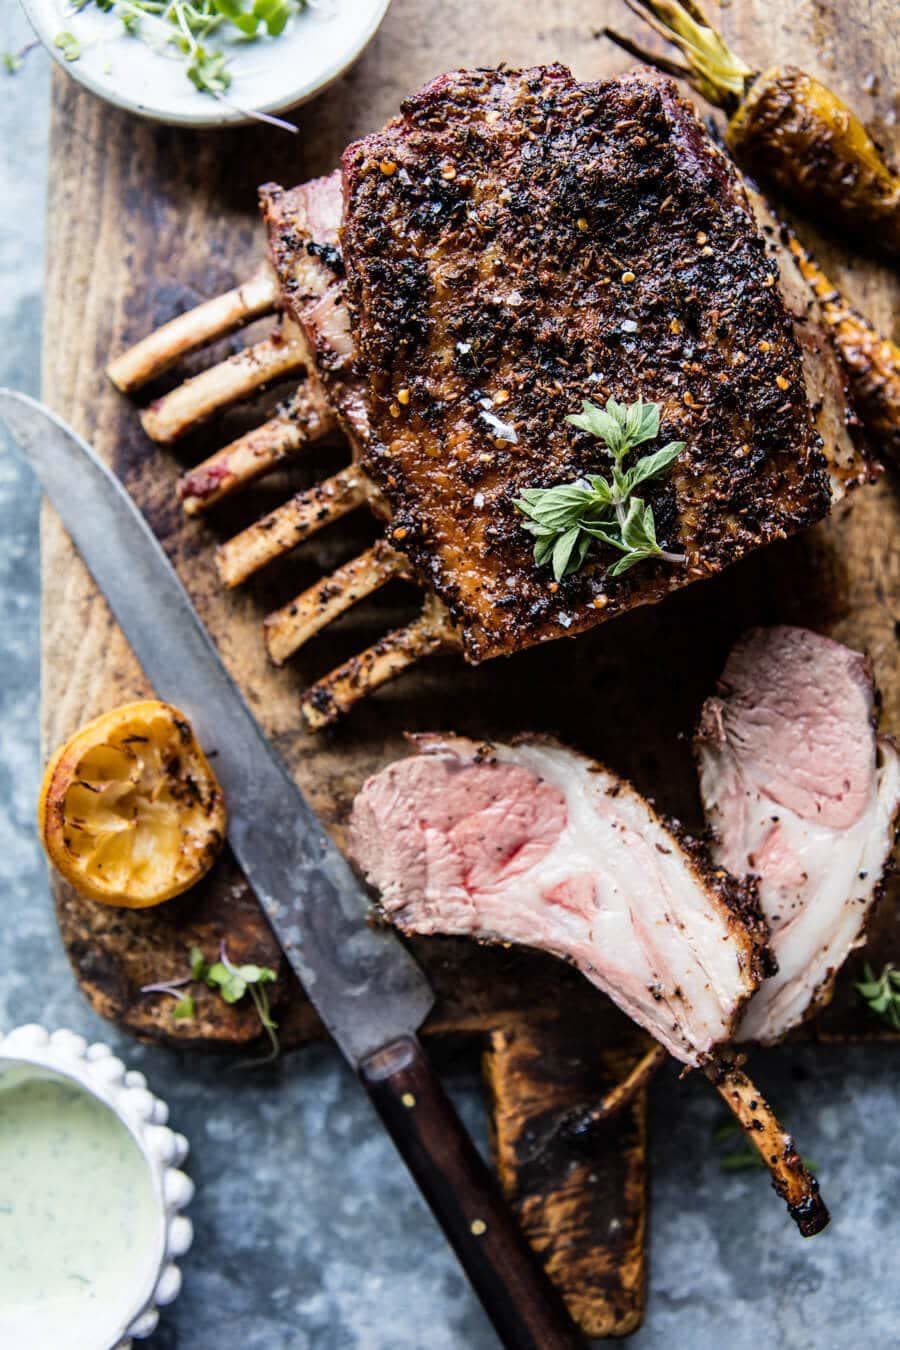 <strong>Get the <a href="https://www.halfbakedharvest.com/roasted-rack-lamb-basil-goat-cheese-sauce/" target="_blank">Roasted Rack of Lamb with Basil Goat Cheese Sauce recipe</a> from&nbsp;Half Baked Harvest</strong>